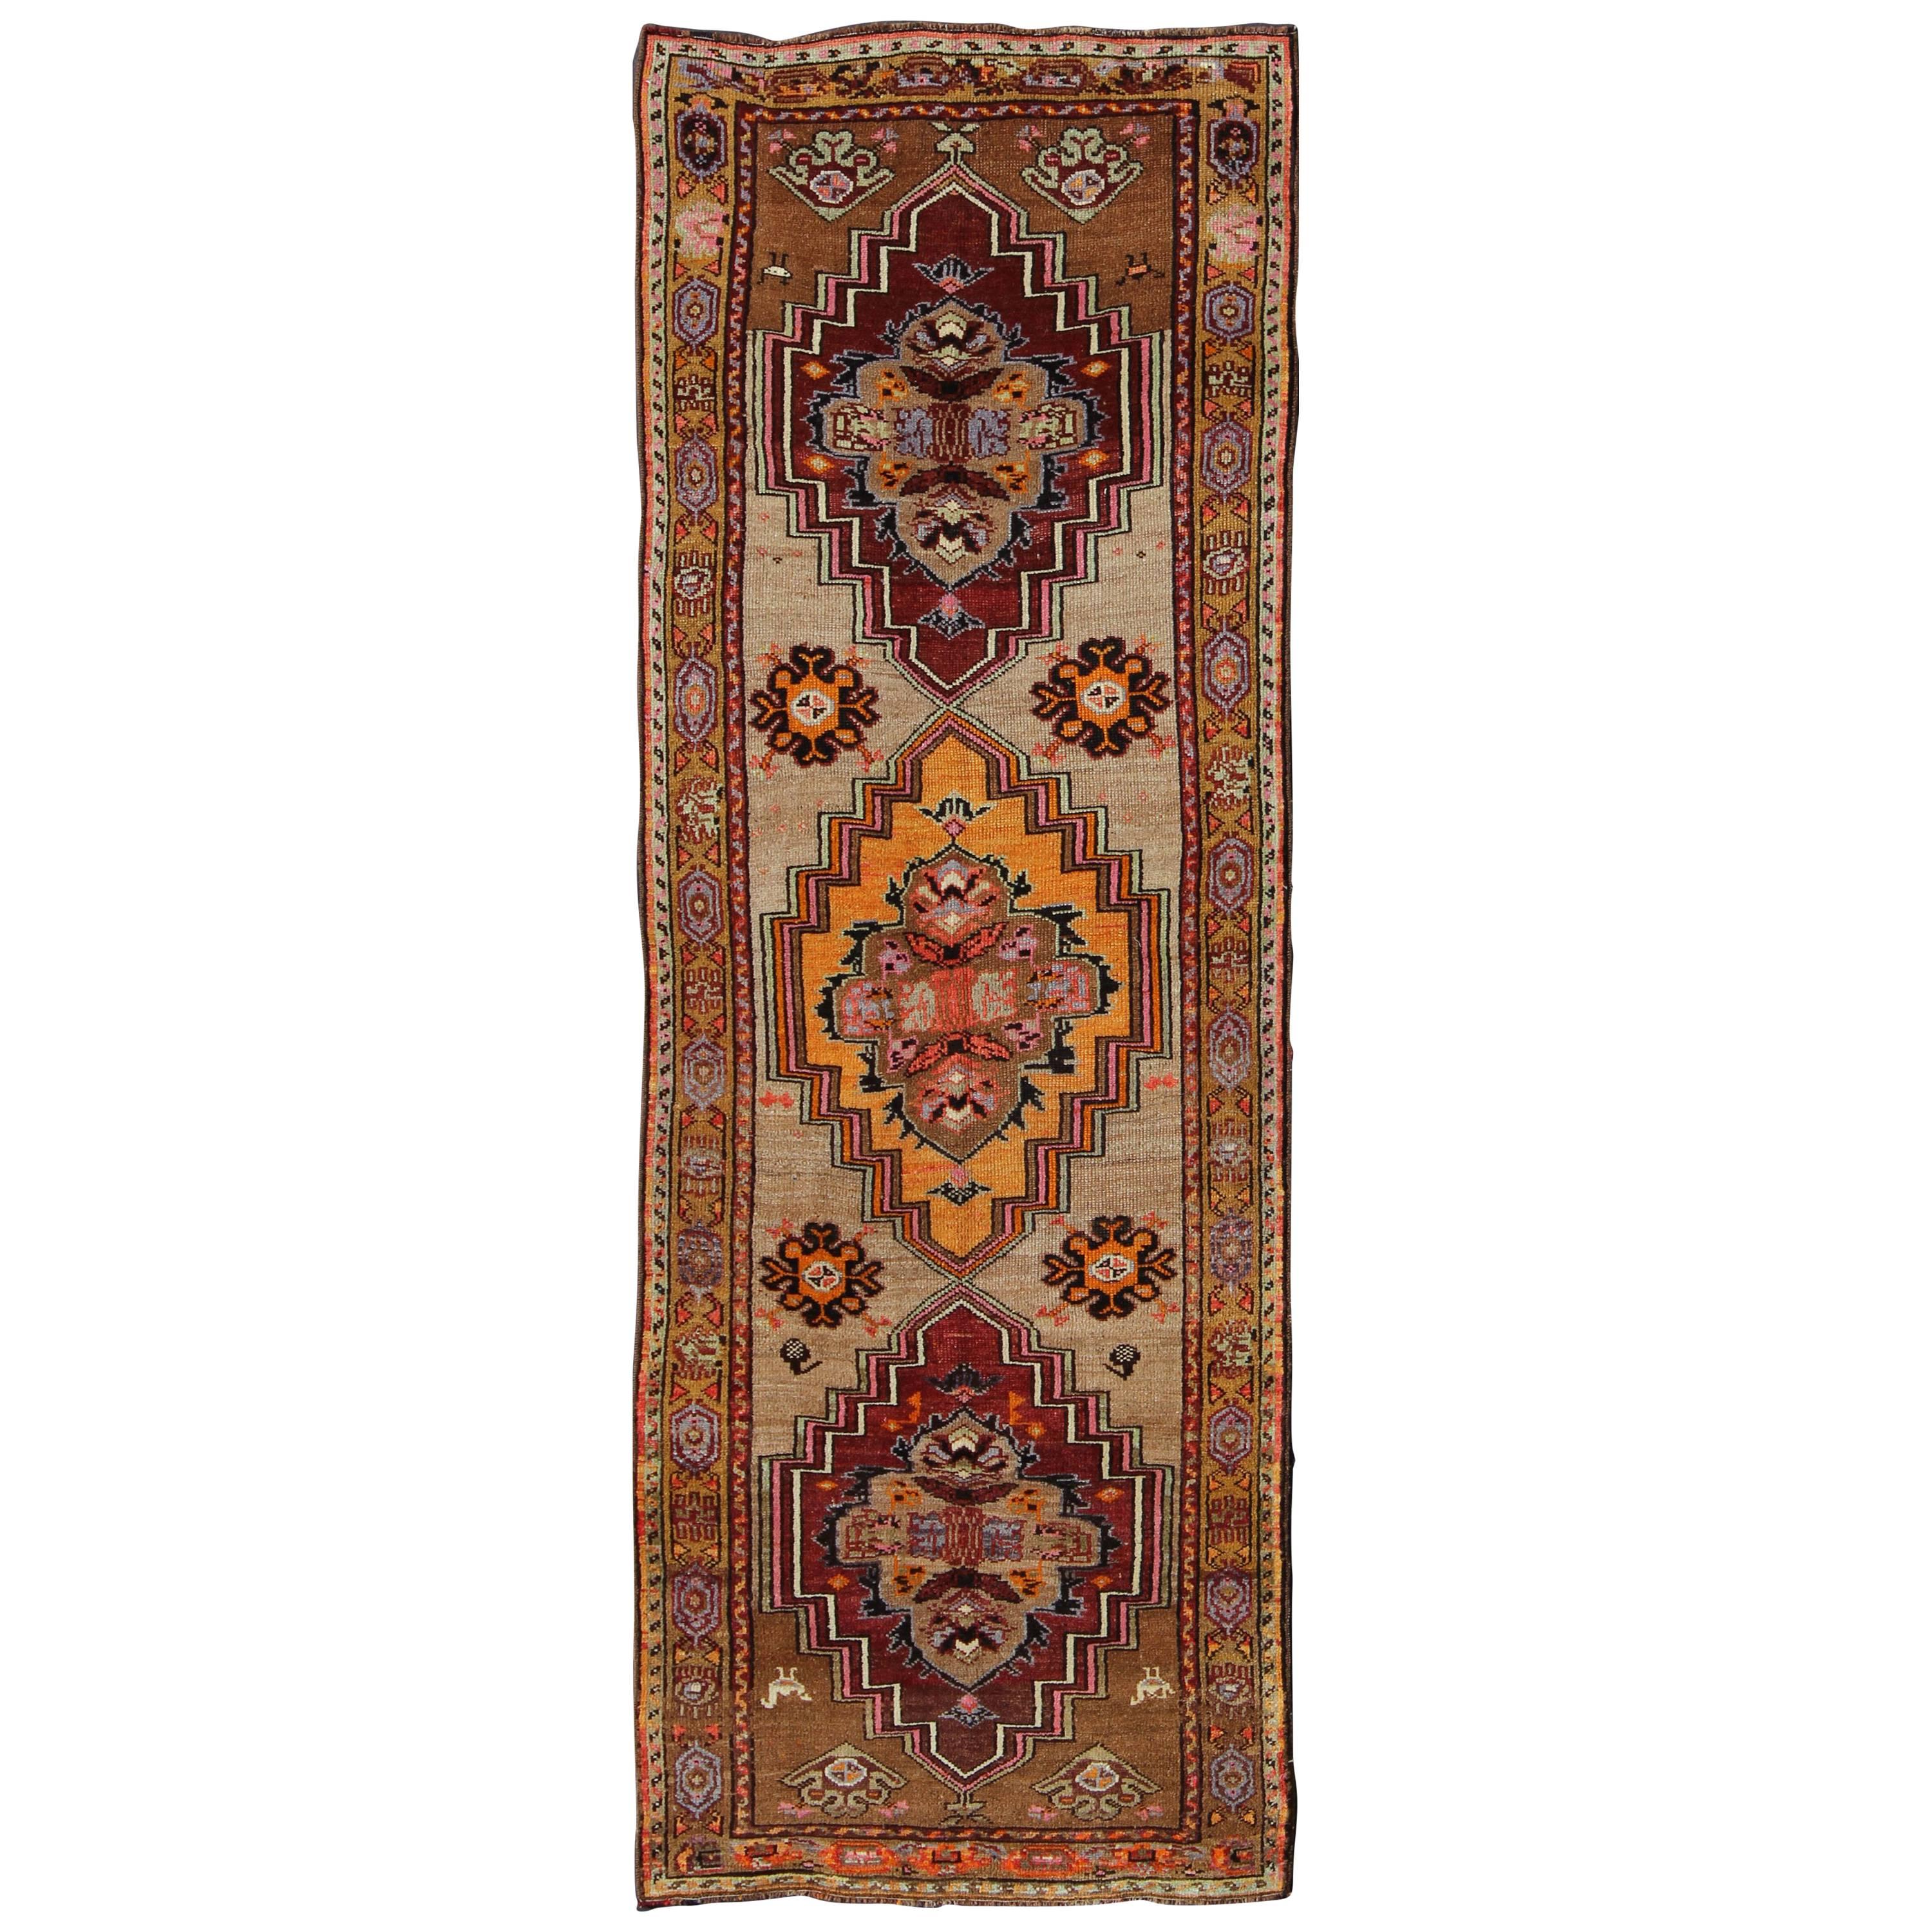 Vintage Turkish Oushak Runner with Three Medallions in Maroon, Gold, and Taupe